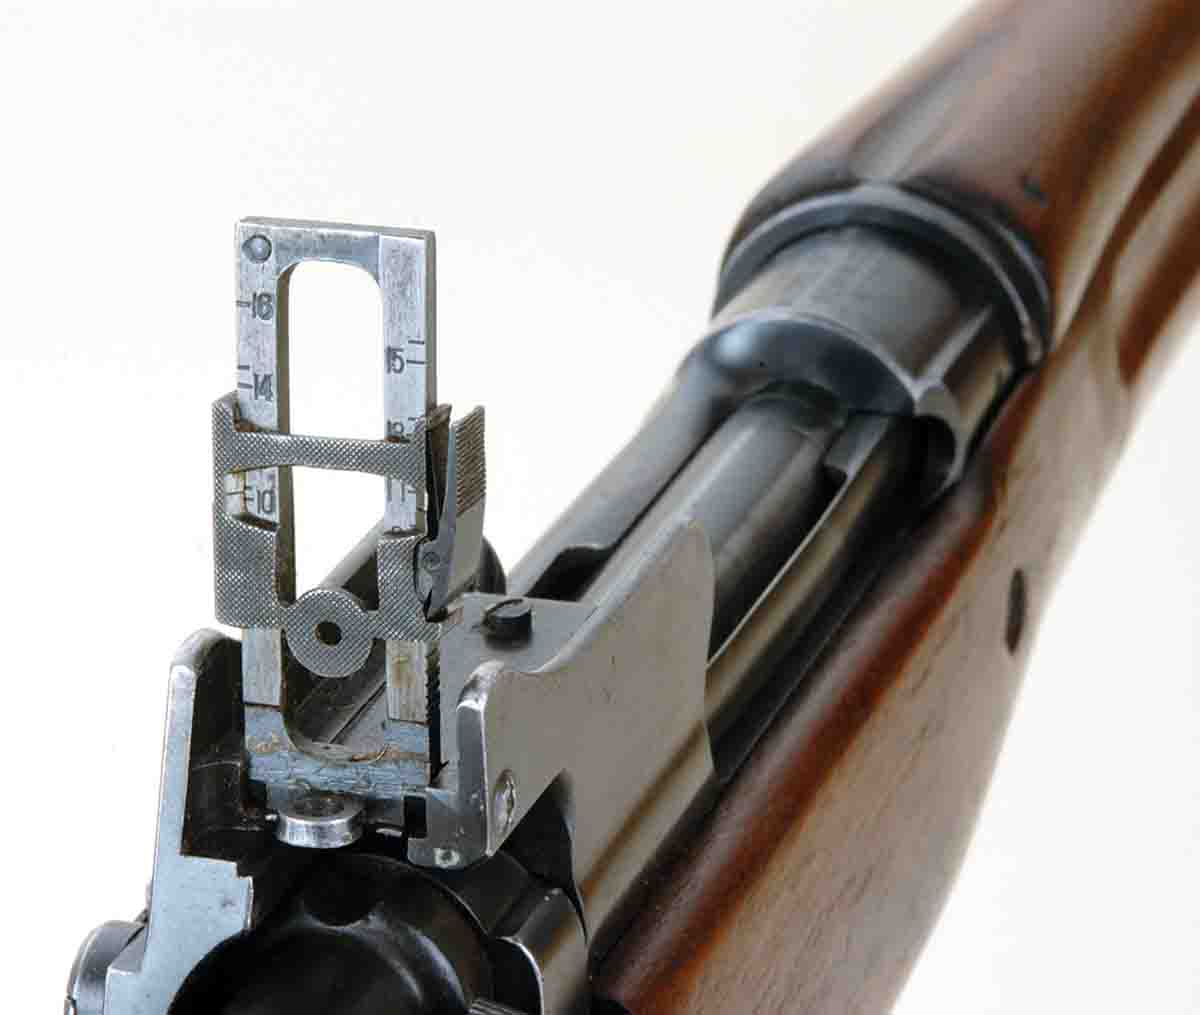 For rear sights, Model 1917s had a unique two- aperture rear. One aperture was used with the ladder lowered for a battle zero. When the sight ladder was raised, a second aperture came into play with elevation graduations to 1,800 yards.